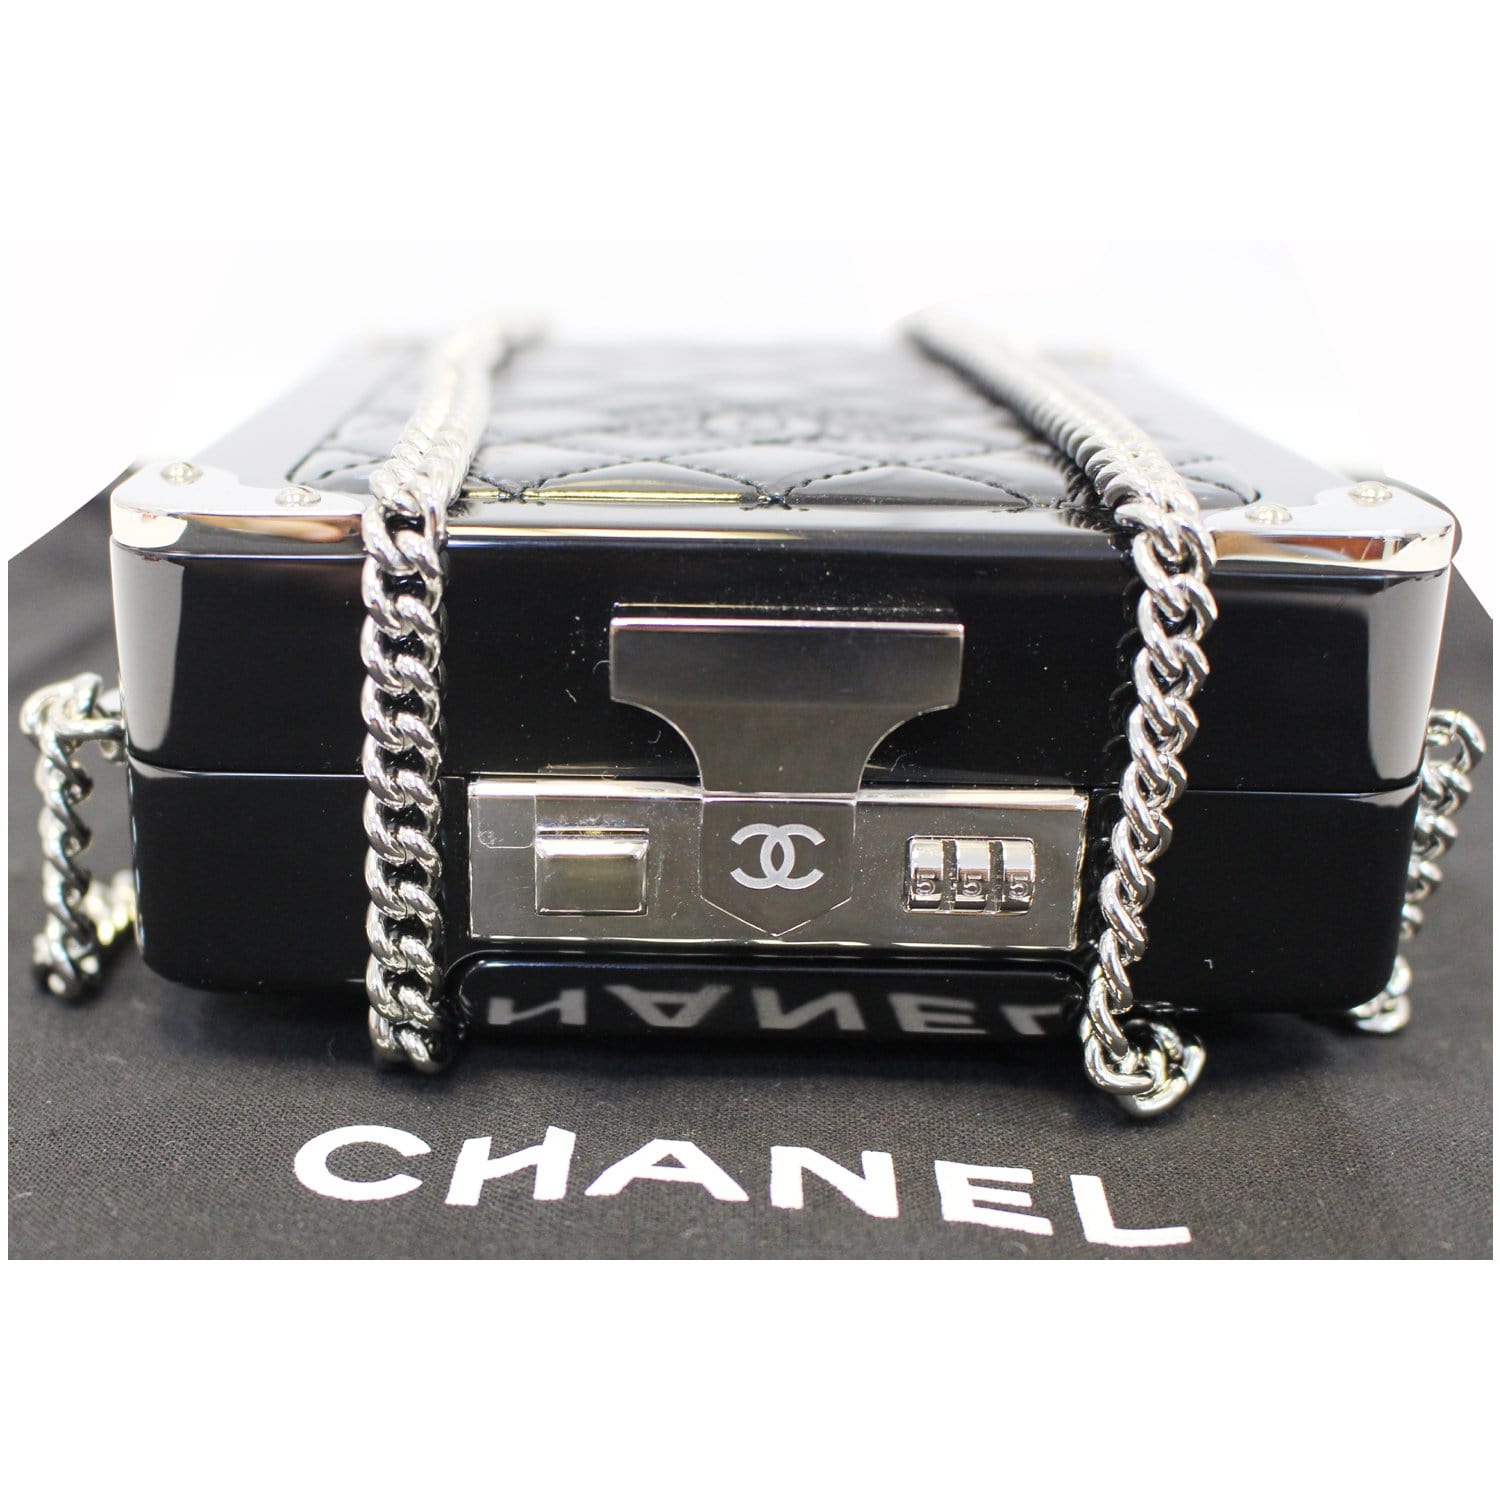 A Set of Two Chanel Bags, Handbags & Accessories, The New York Collection, 2021